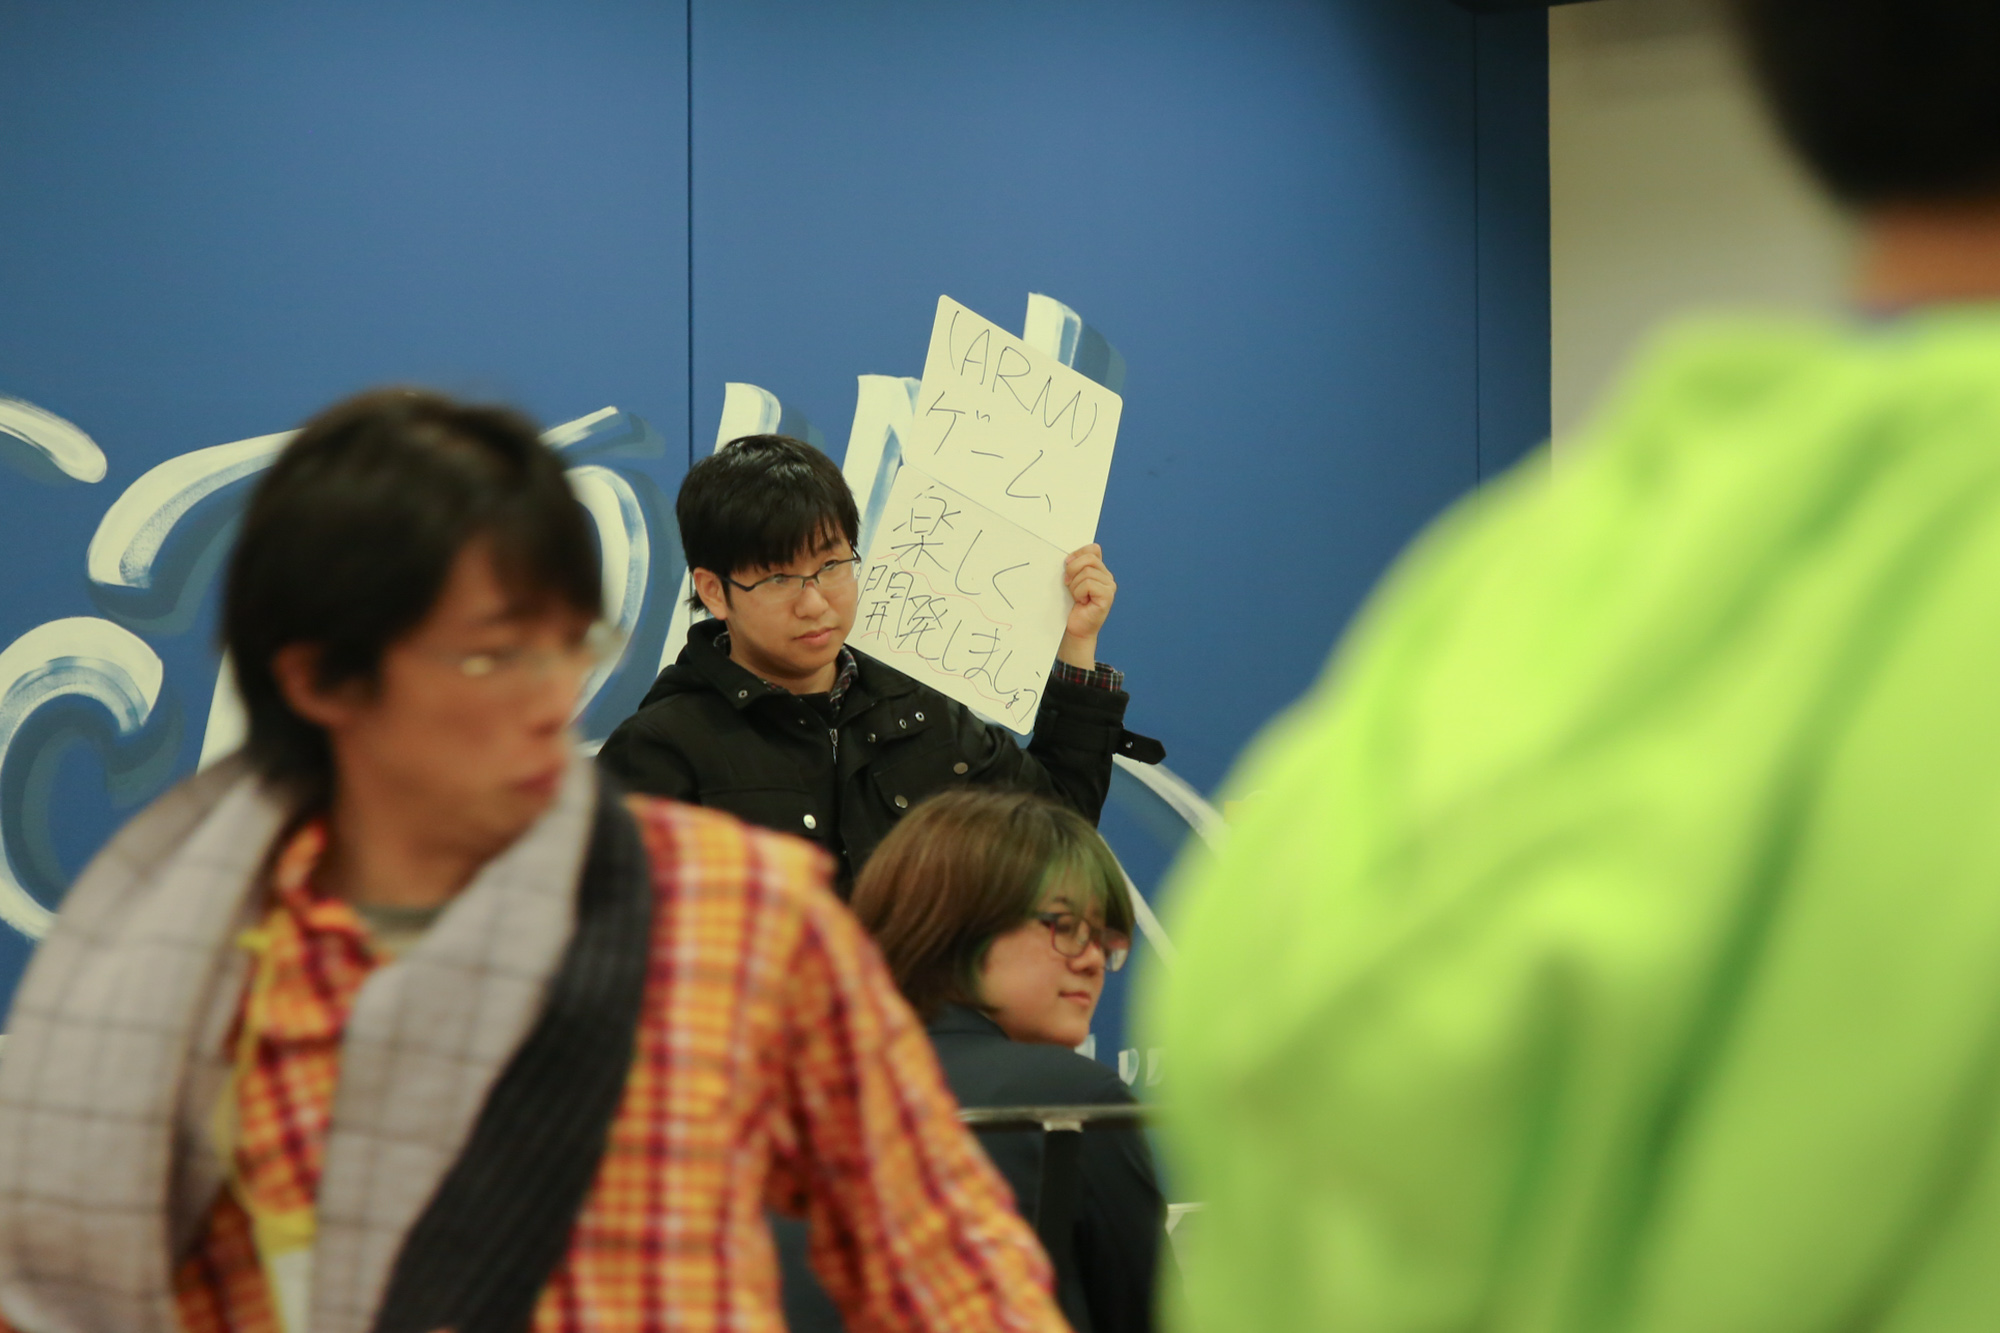 people gathered at an office with signs about computers